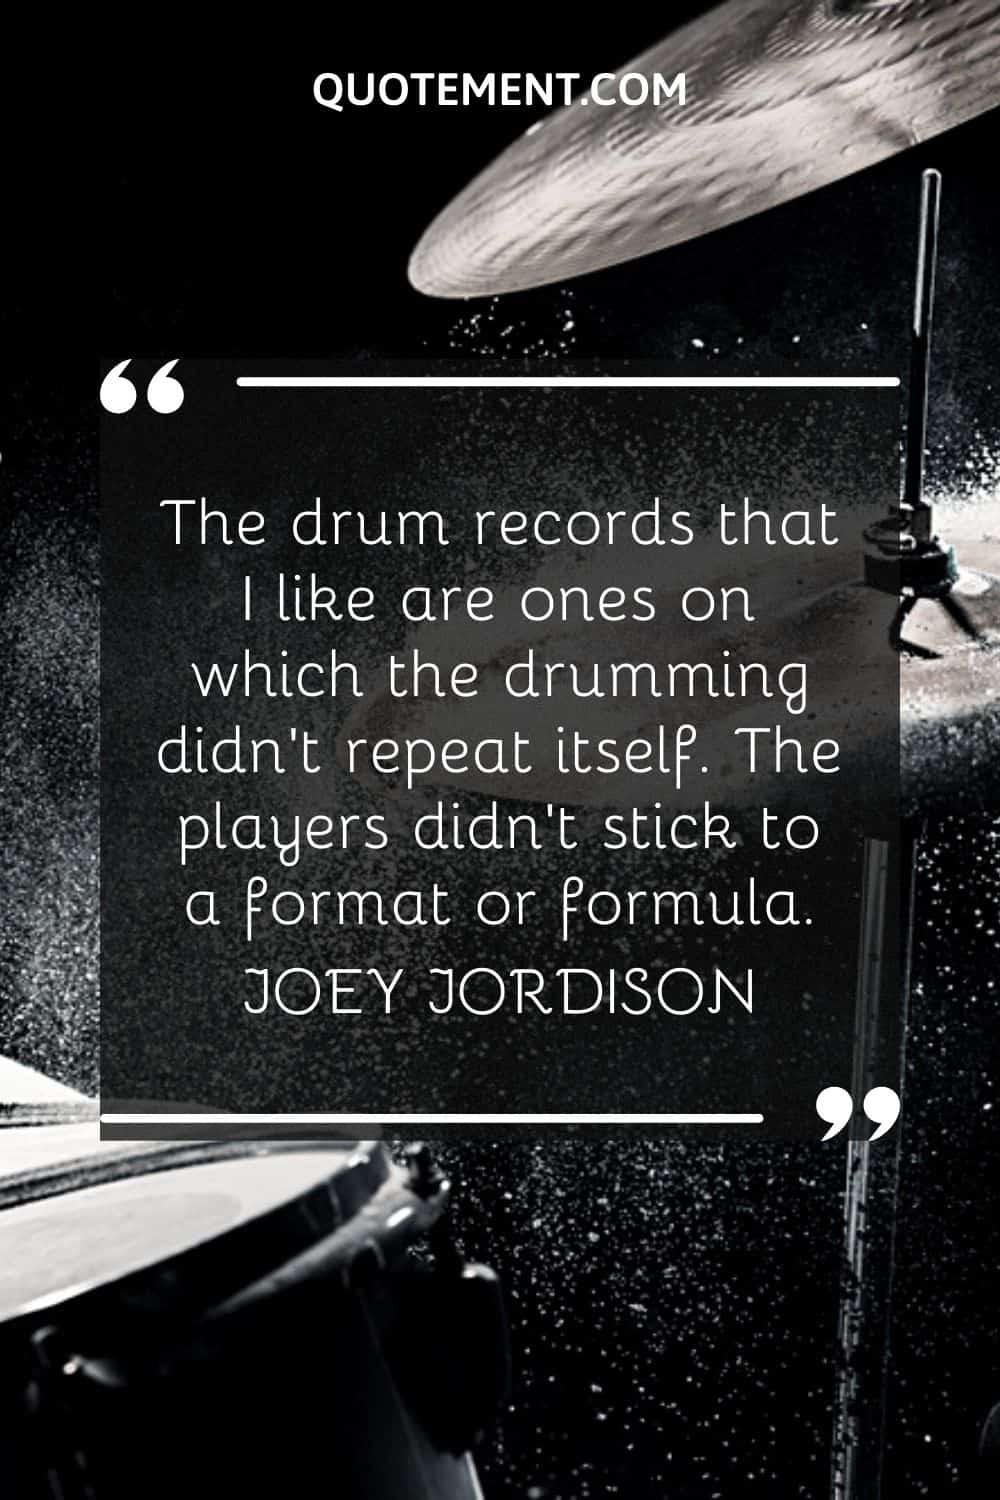 The drum records that I like are ones on which the drumming didn't repeat itself. The players didn't stick to a format or formula